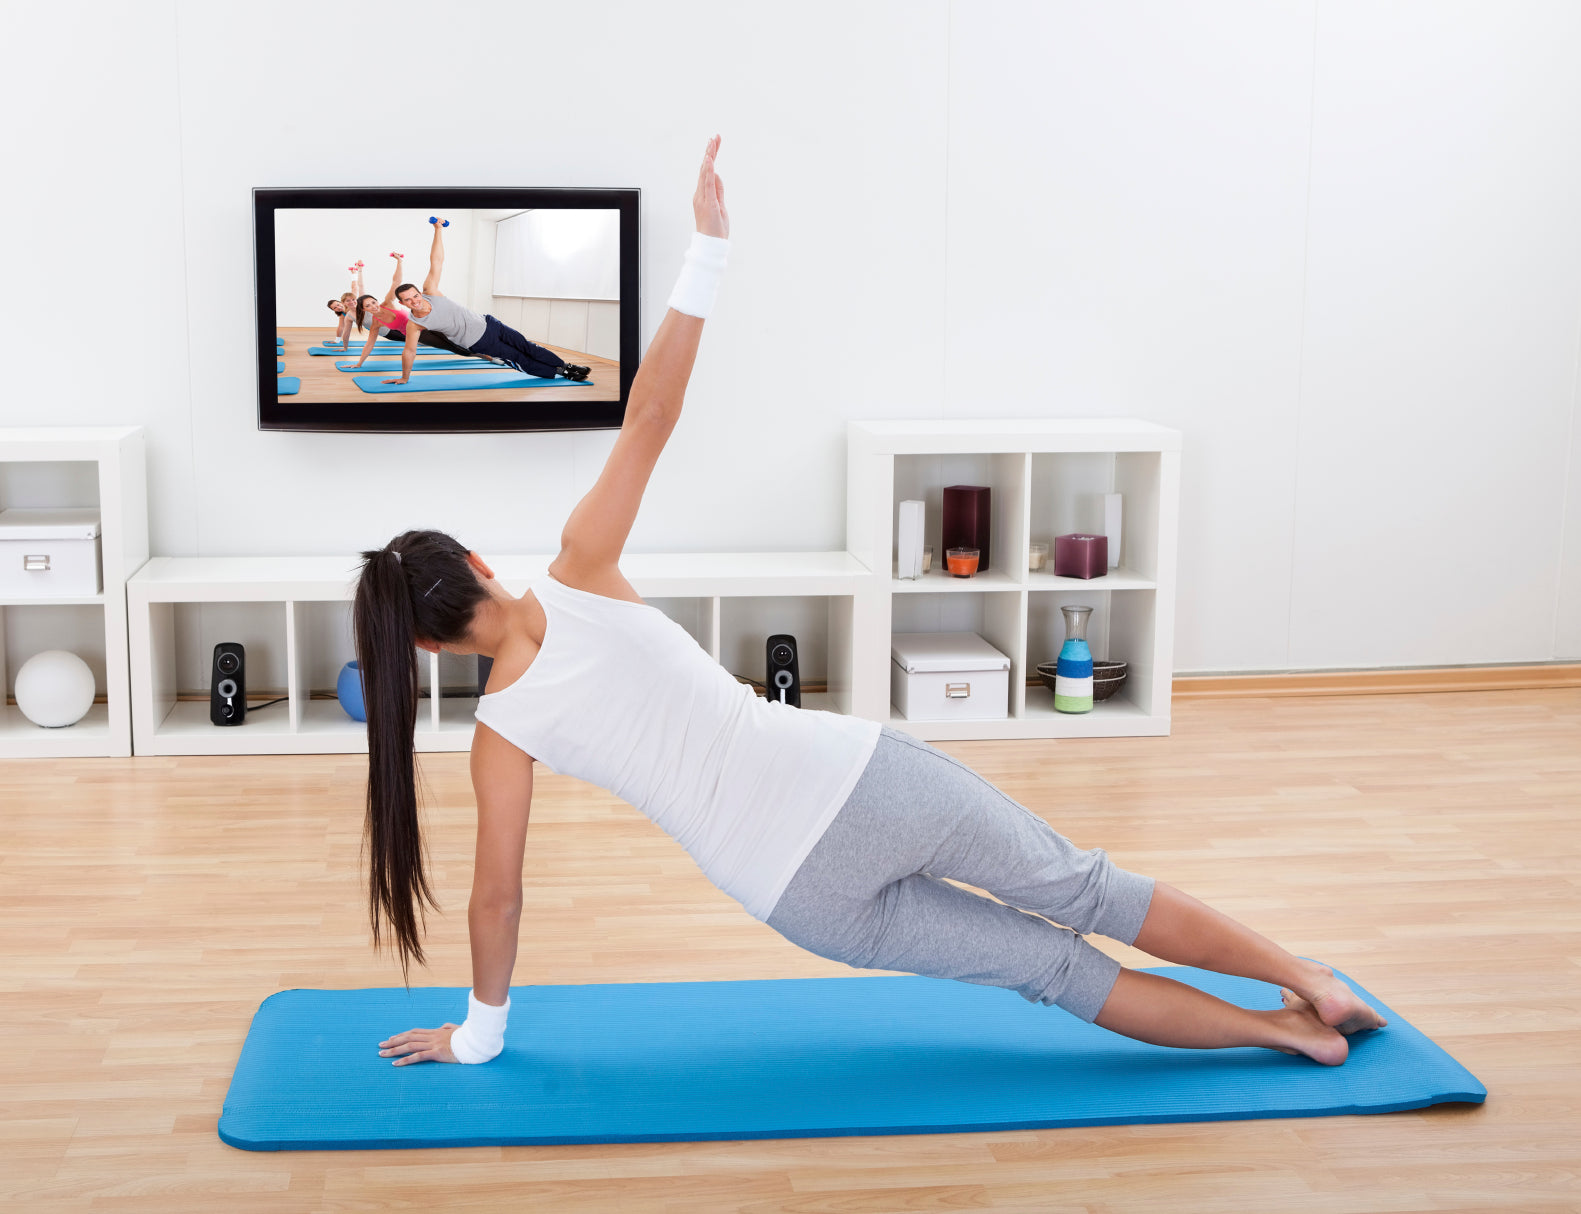 How to Create a Yoga Zone for an At-Home Practice